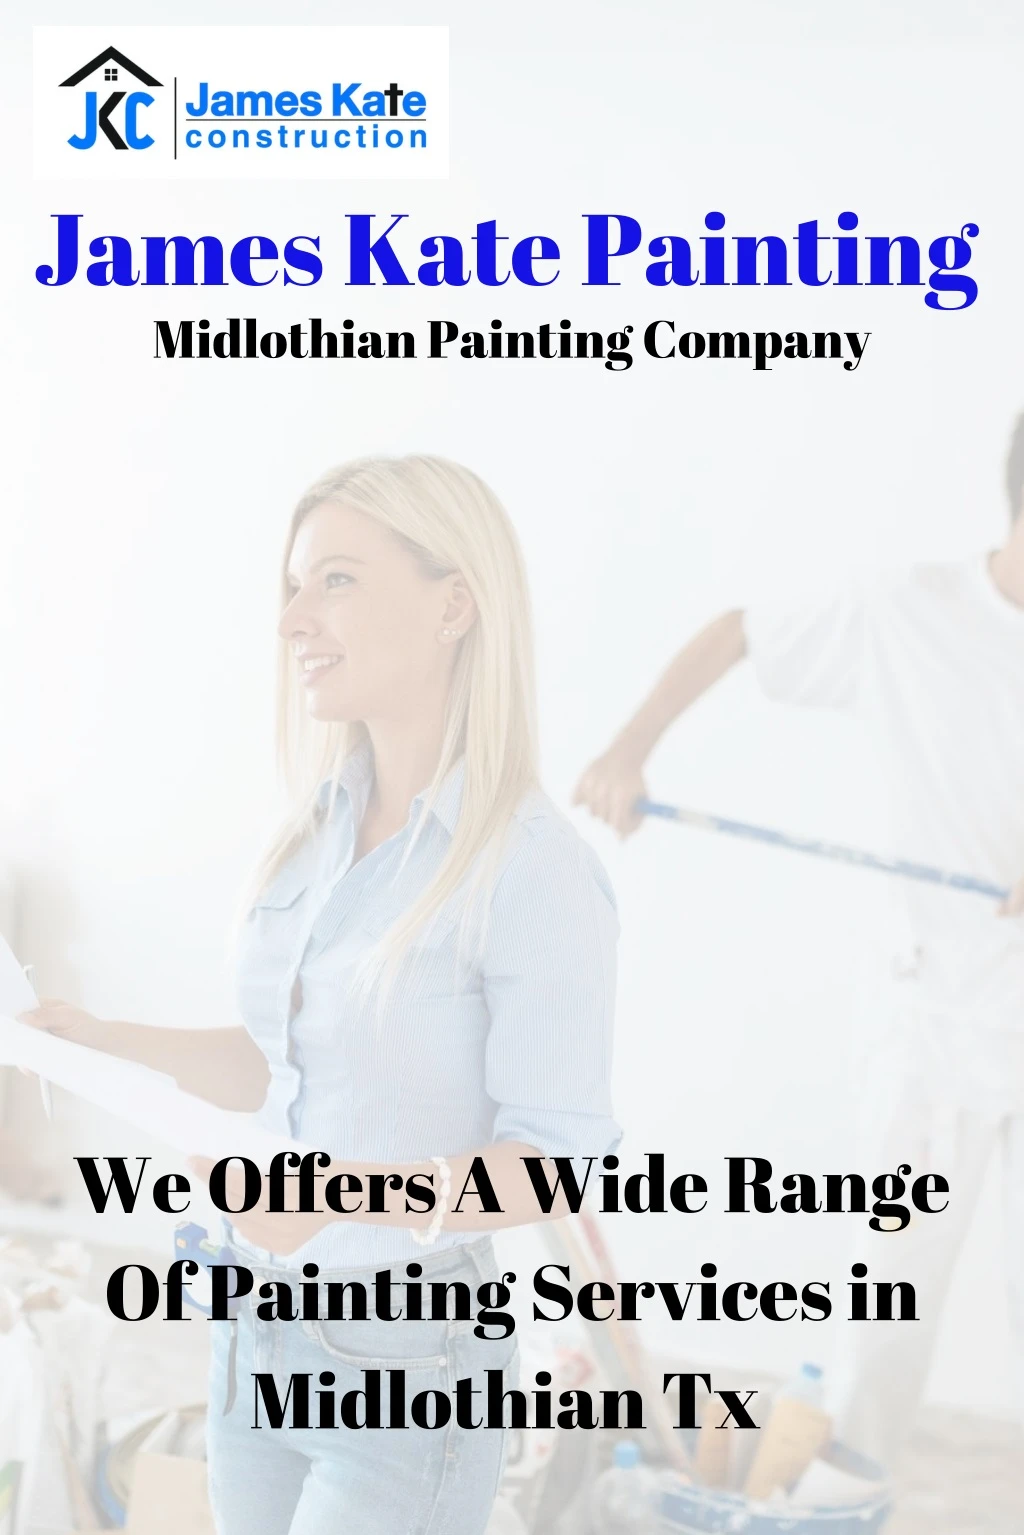 james kate painting midlothian painting company